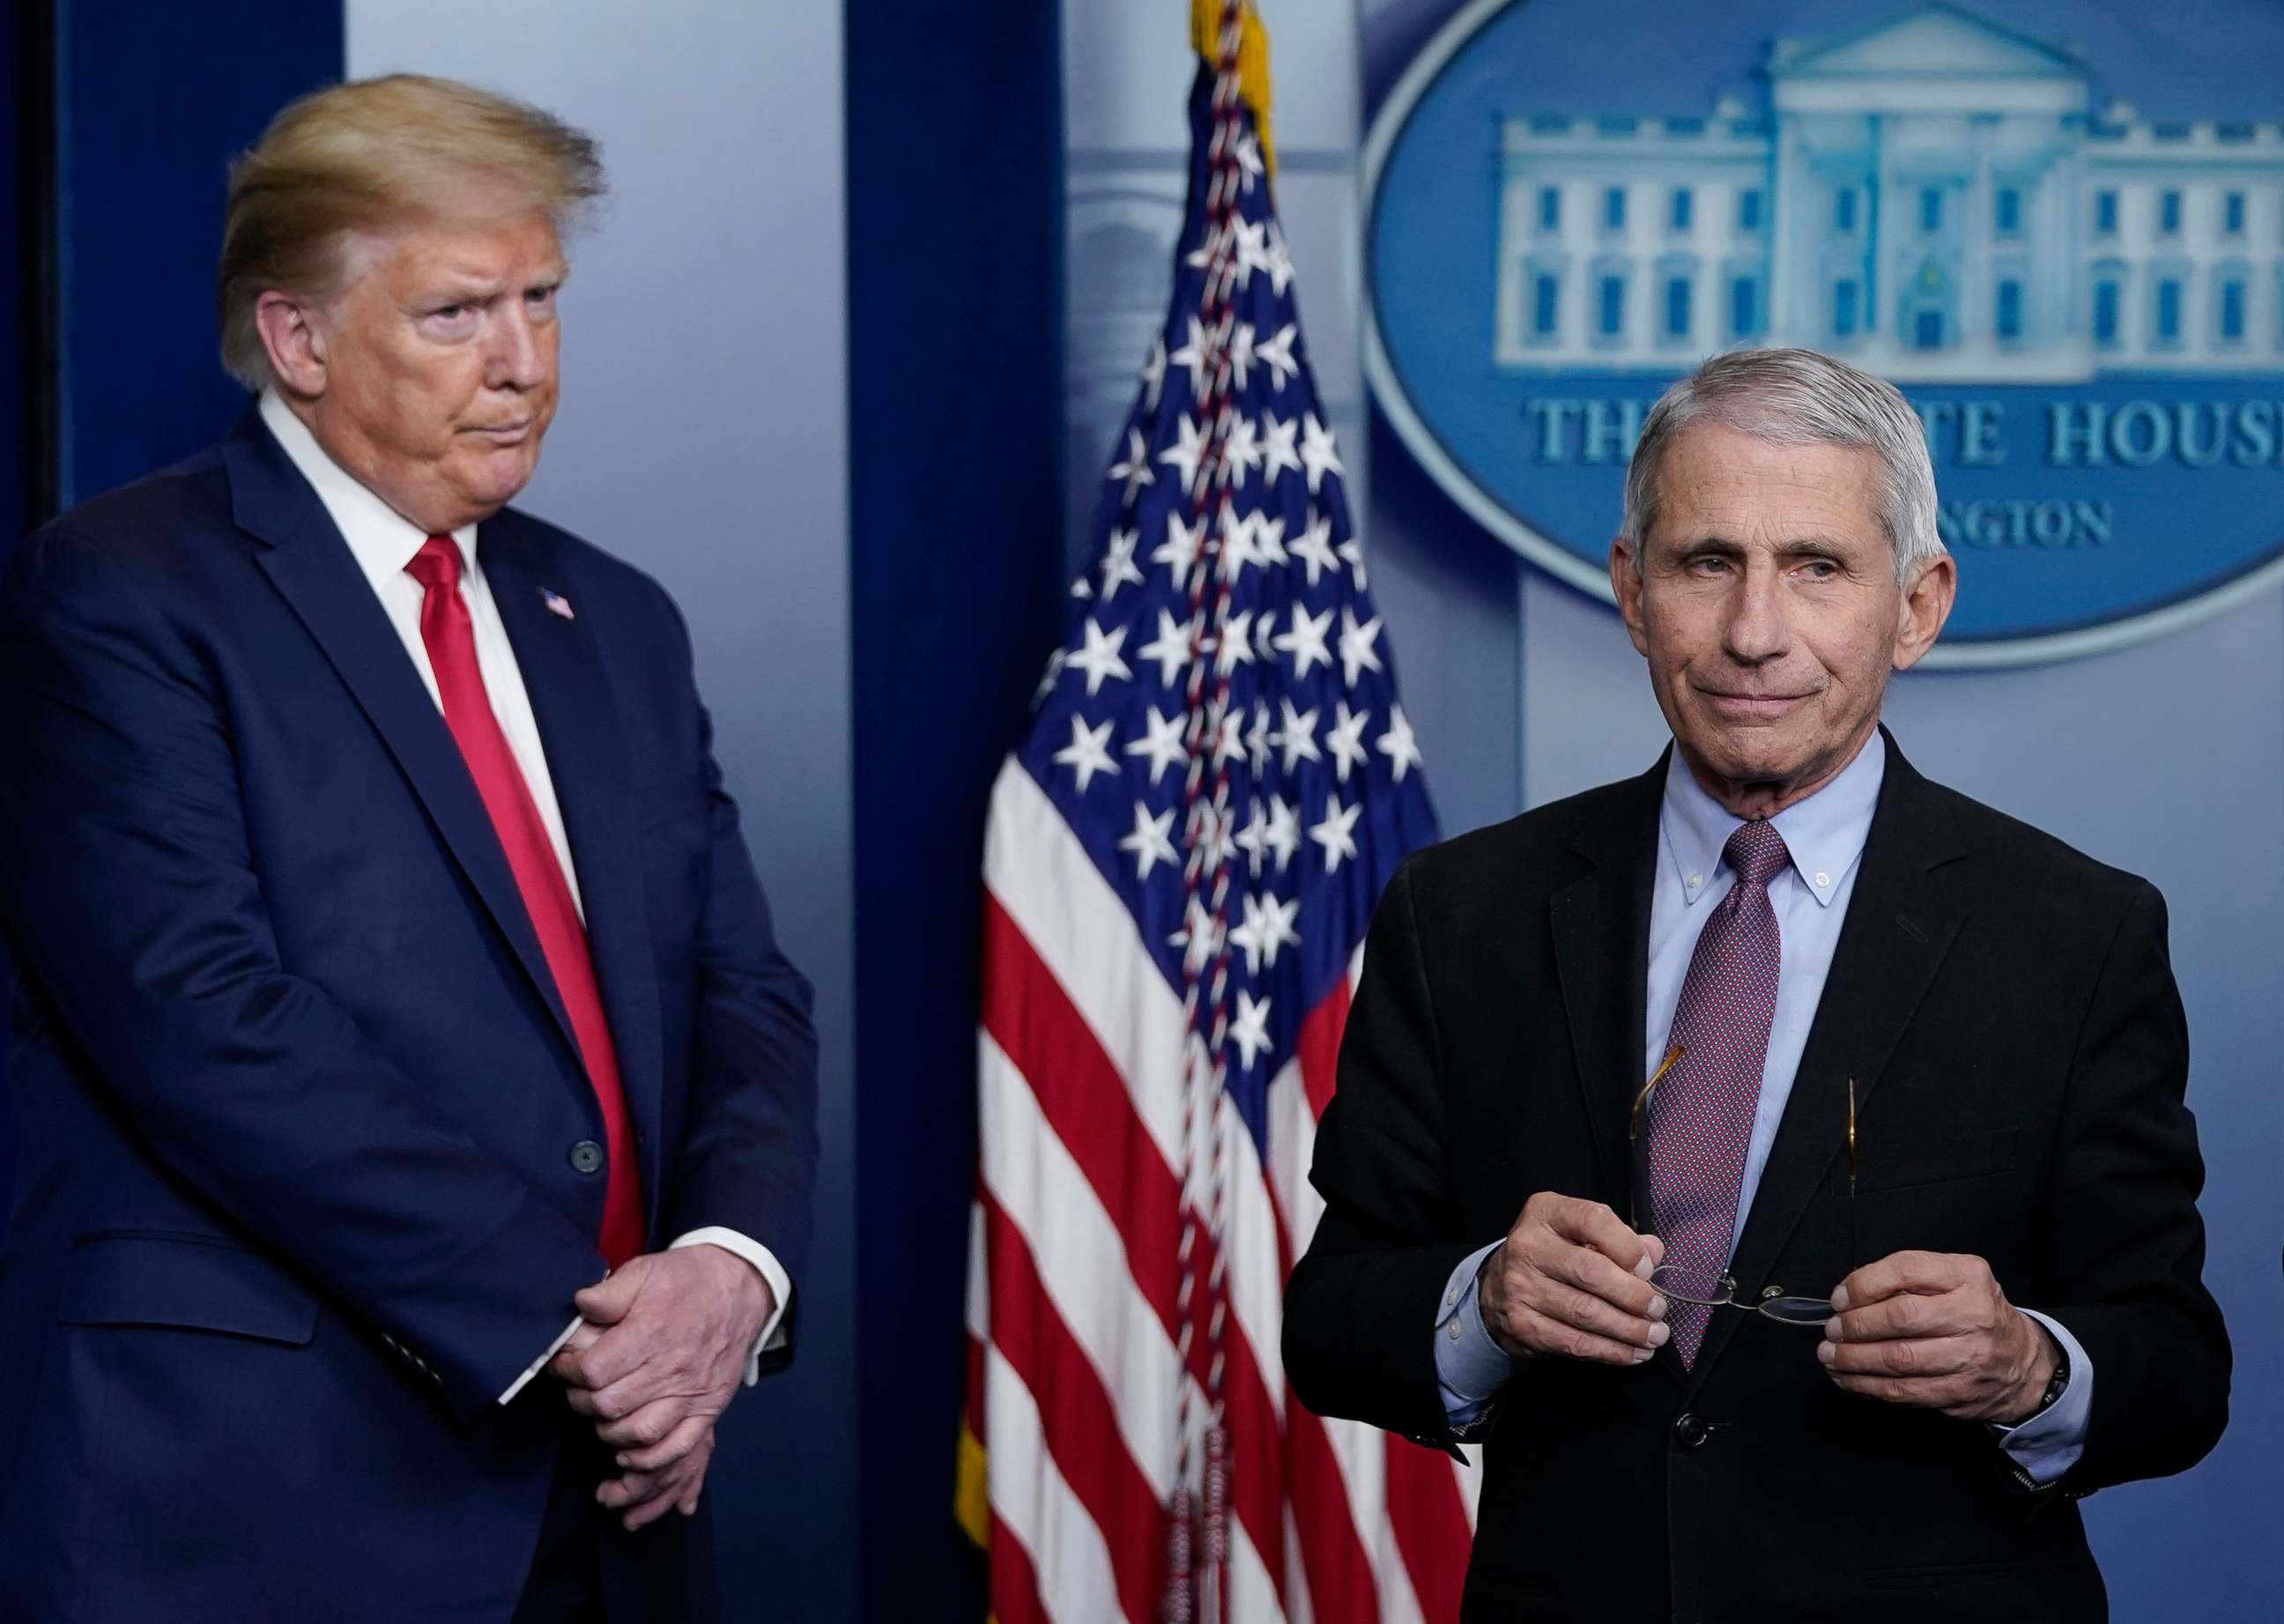 PHOTO: Dr. Anthony Fauci, director of the National Institute of Allergy and Infectious Diseases, and President Donald Trump participate in the daily coronavirus task force briefing at the White House, April 22, 2020, in Washington, DC.